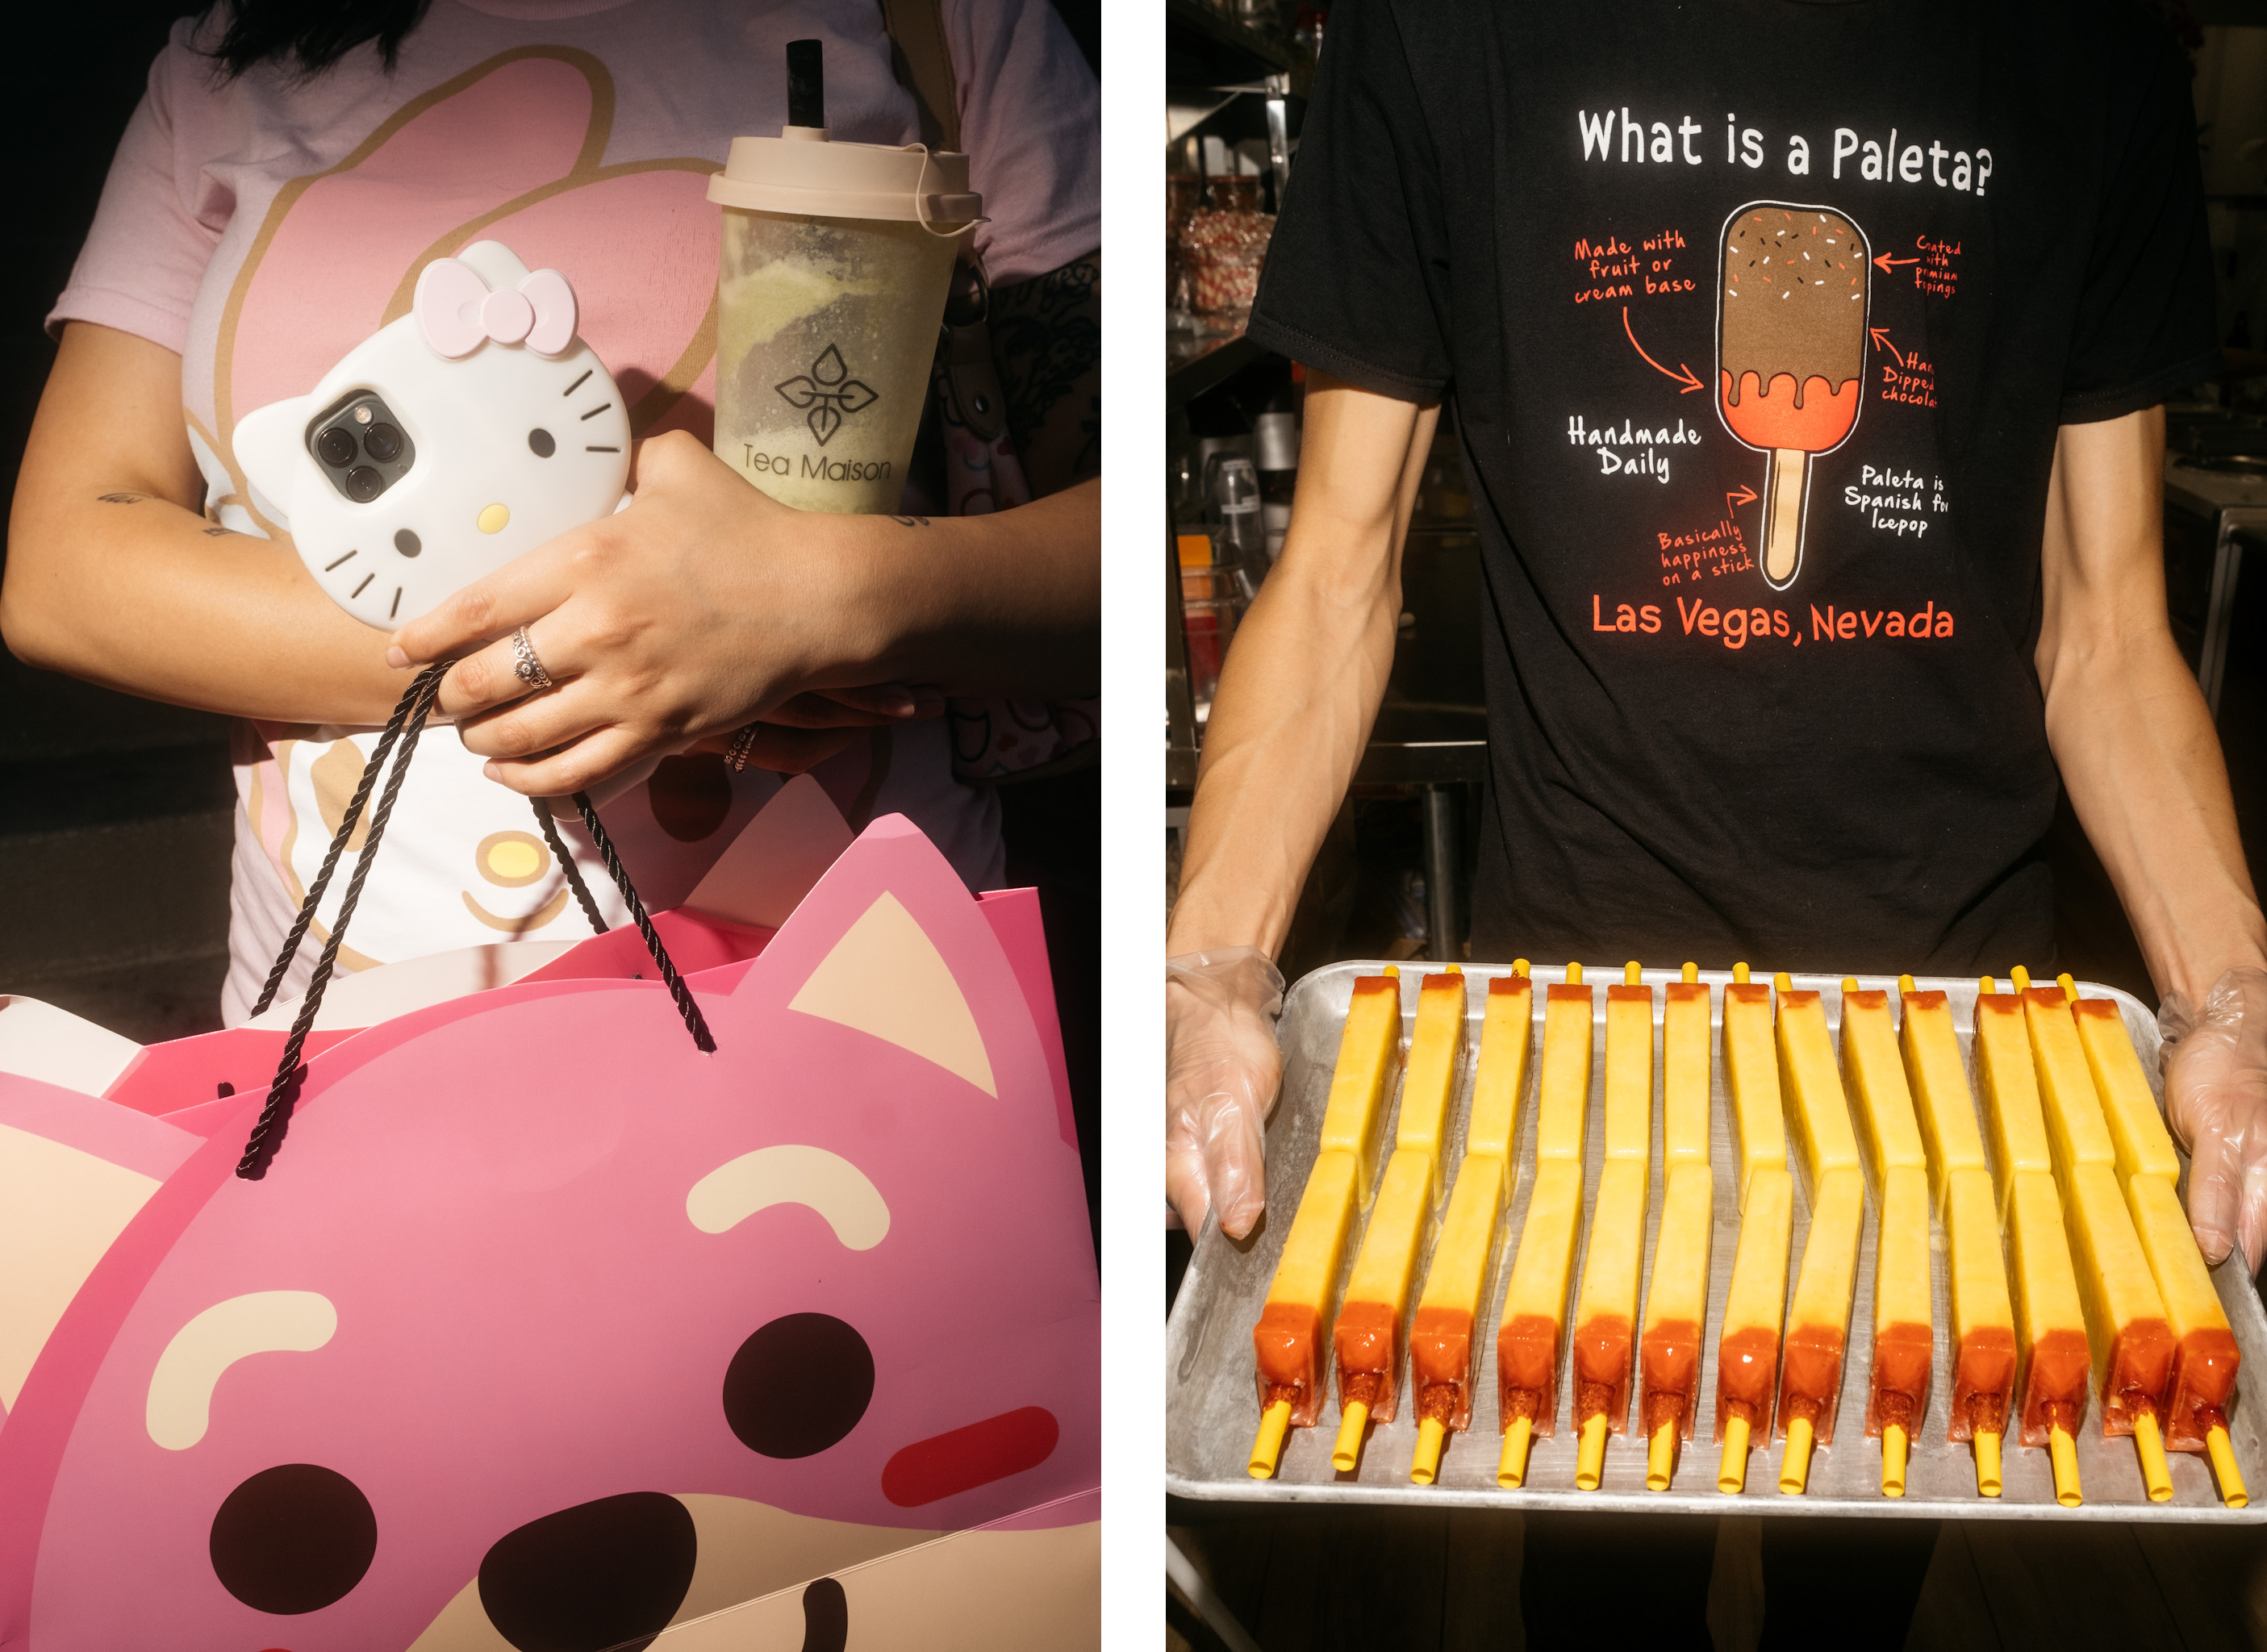 Left: A Shanghai Plaza patron holidng her day's purchases from Chinatown. Right: A Paleta Bar employee serving up a tray of paletas.